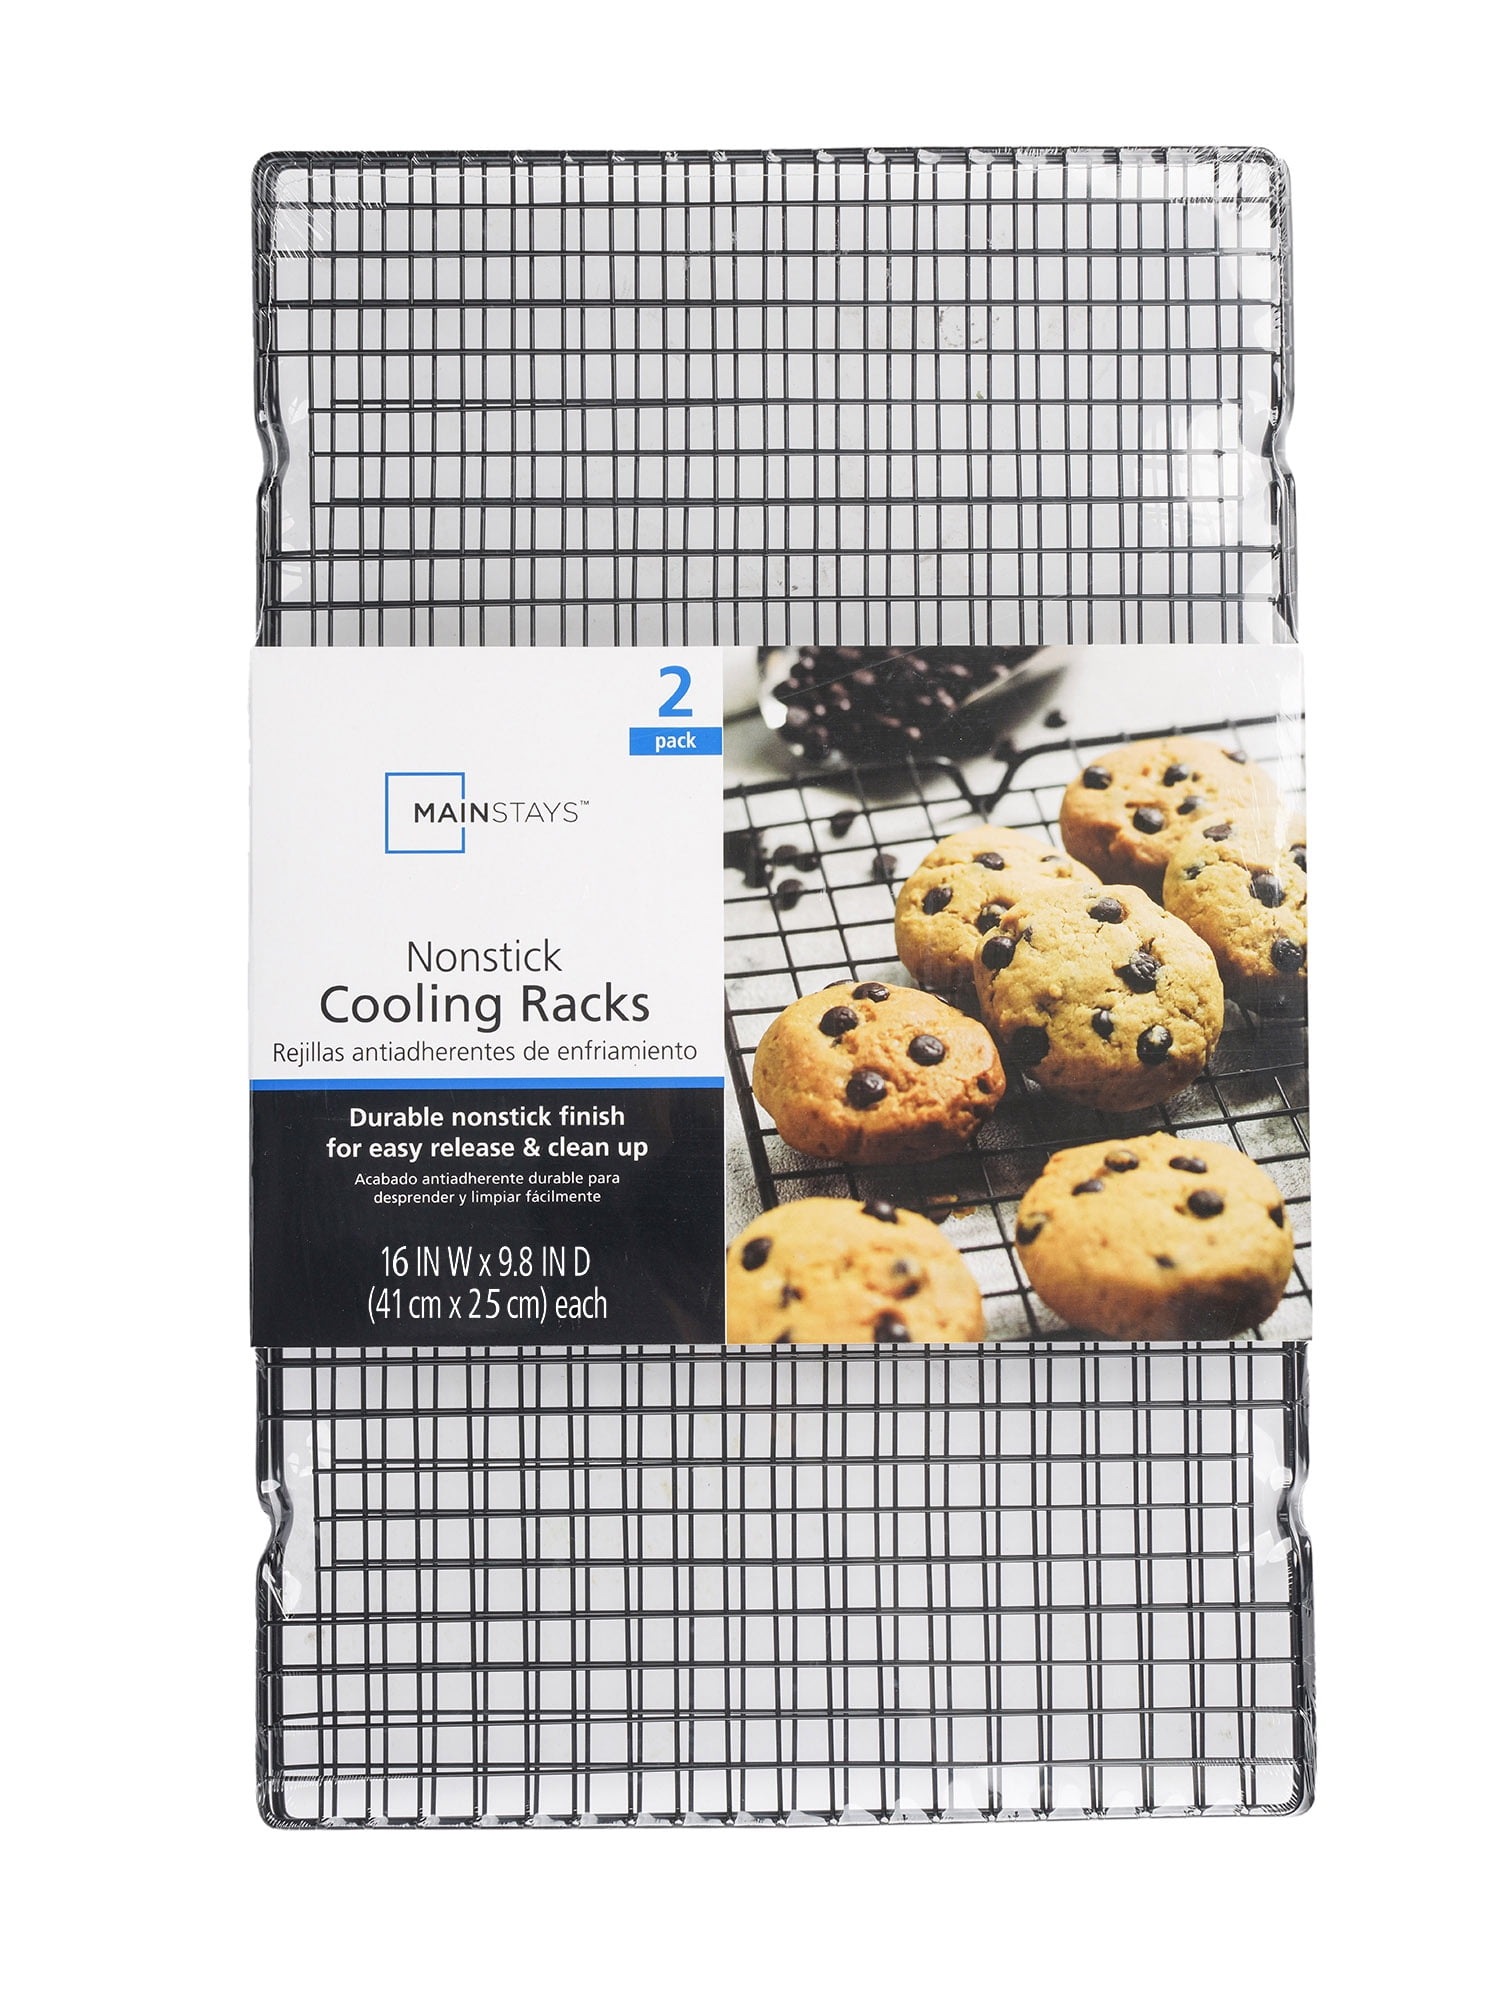 The best way to clean cooling racks (and why they're not just for baking)